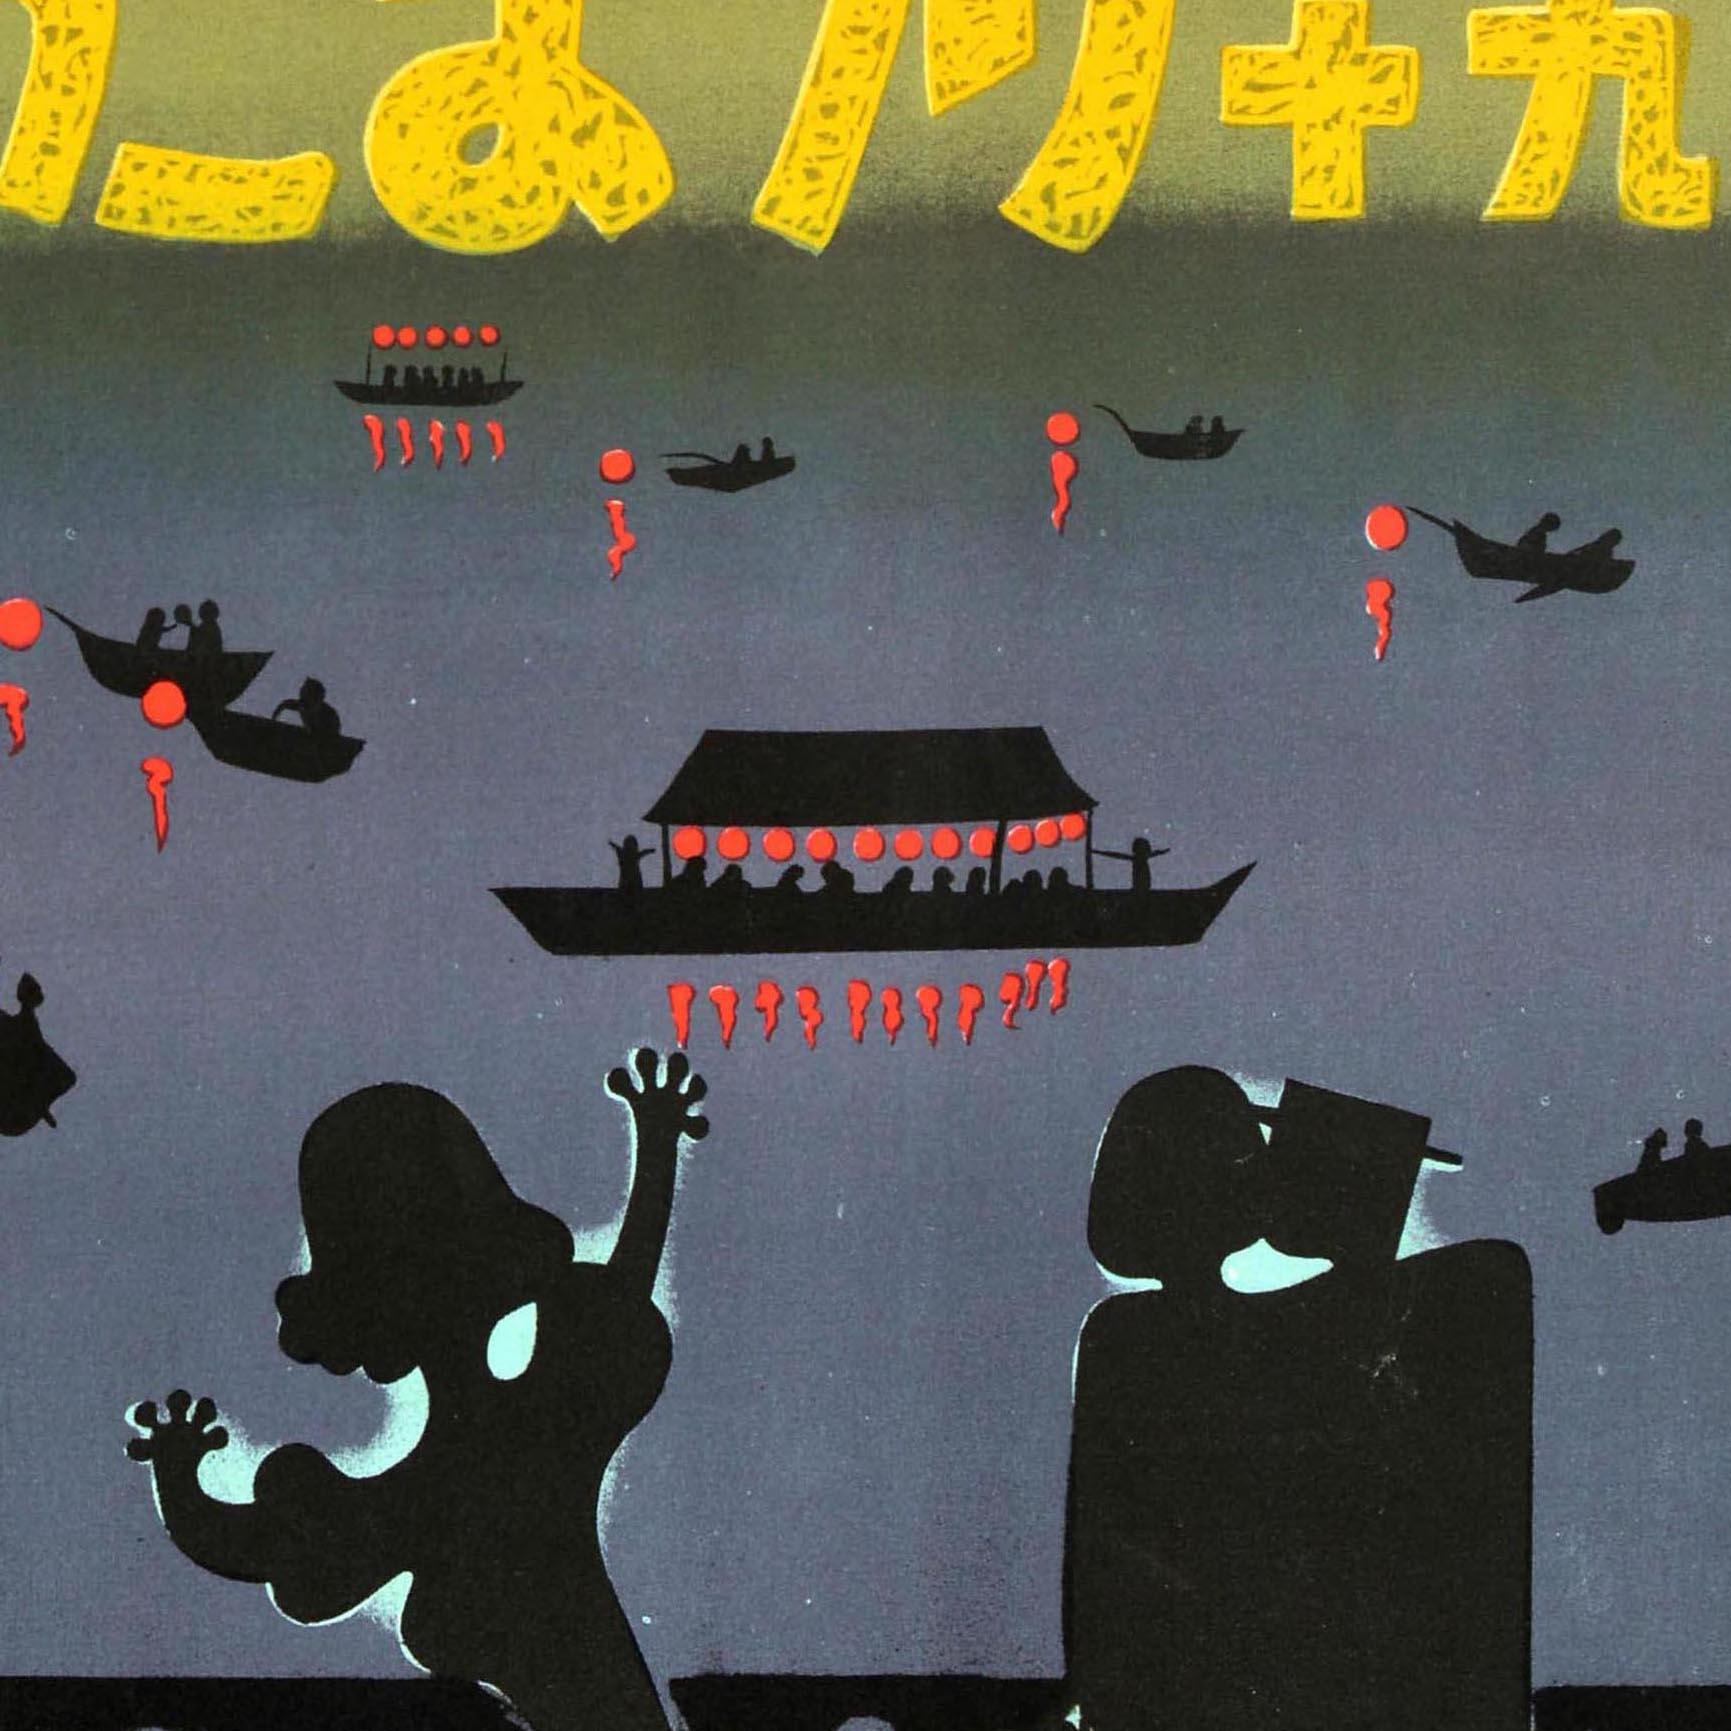 Original vintage travel poster for the Hikone Biwako Great Firework Festival featuring silhouettes of people including children and a cat watching the colourful fireworks over the fresh water Lake Biwa with lanterns reflected on the boats and a